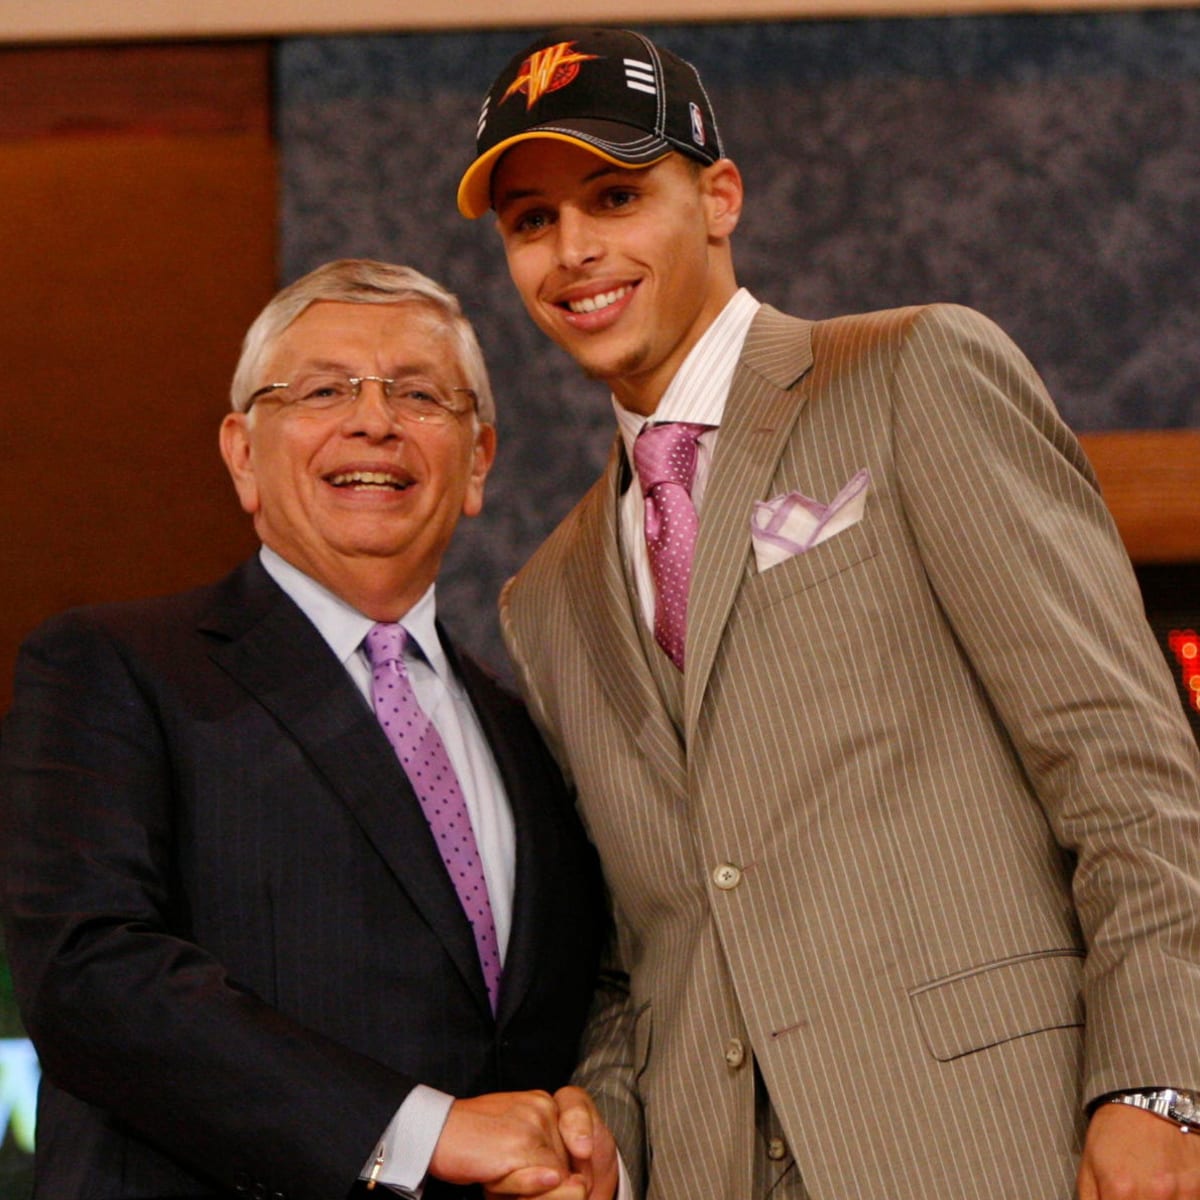 Warriors' Stephen Curry wanted to get selected by Knicks in 2009 NBA Draft  